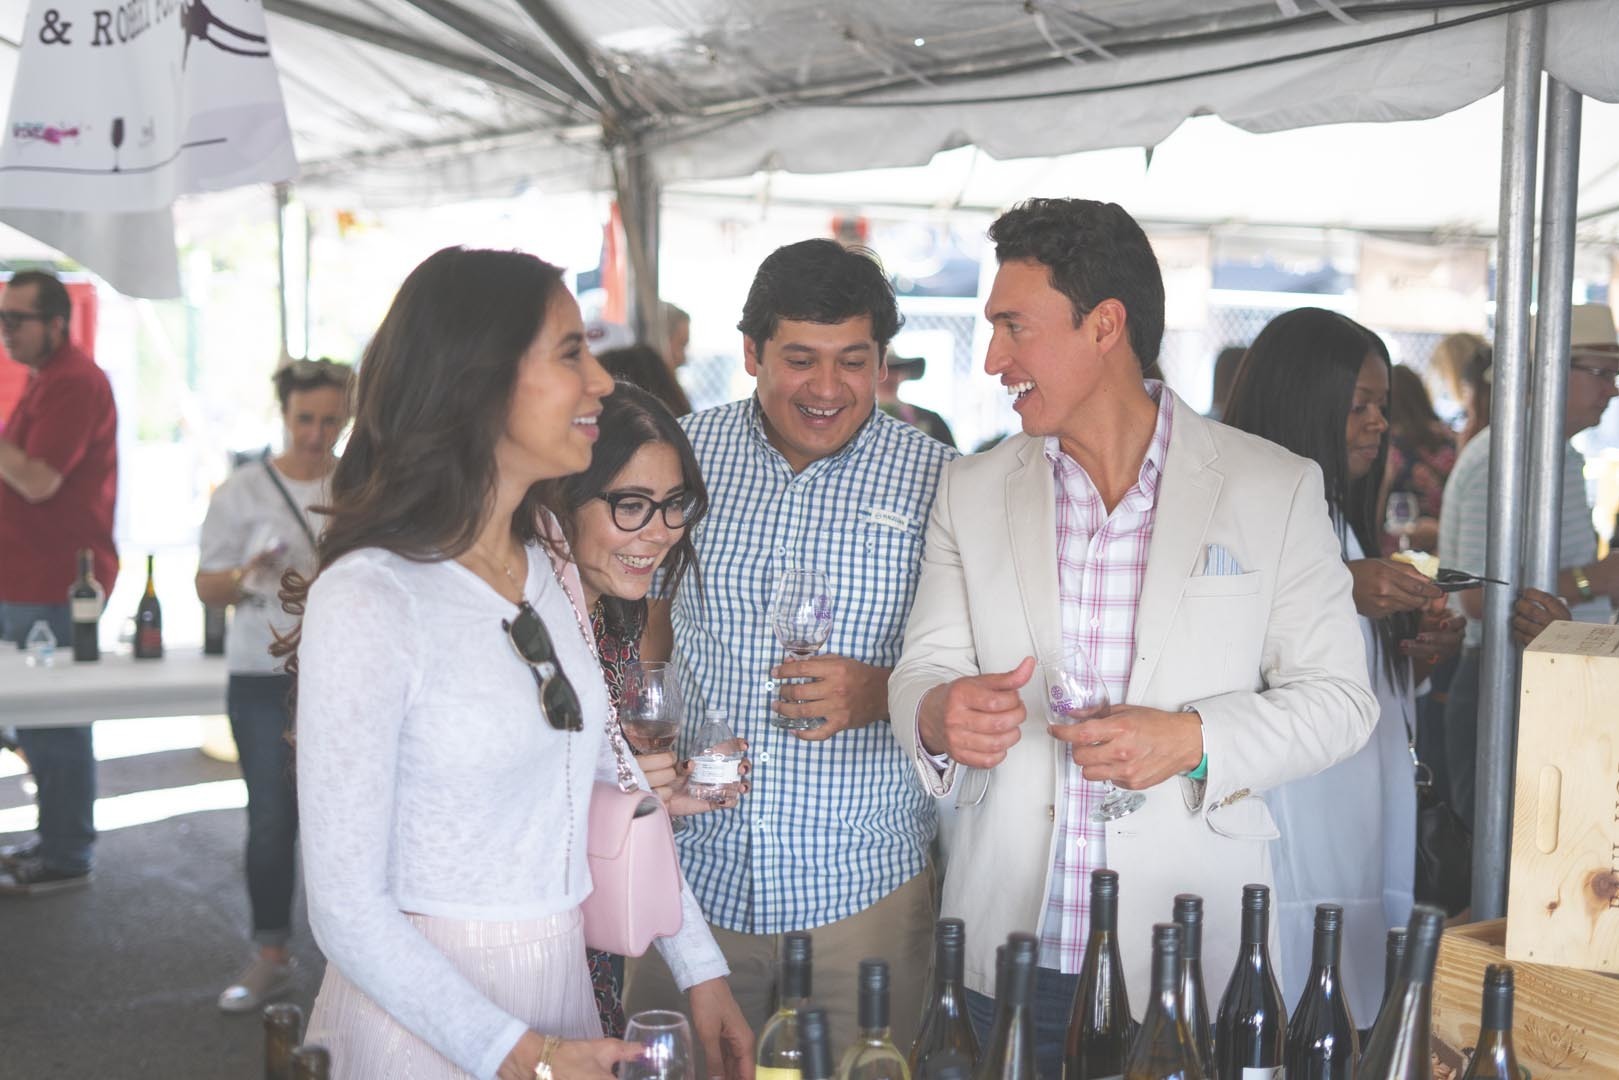 El Paso Wine And Food Festival and new Bubbles Brunch on October 21st and 22nd. Get your tickets now!, El Paso, Texas, United States